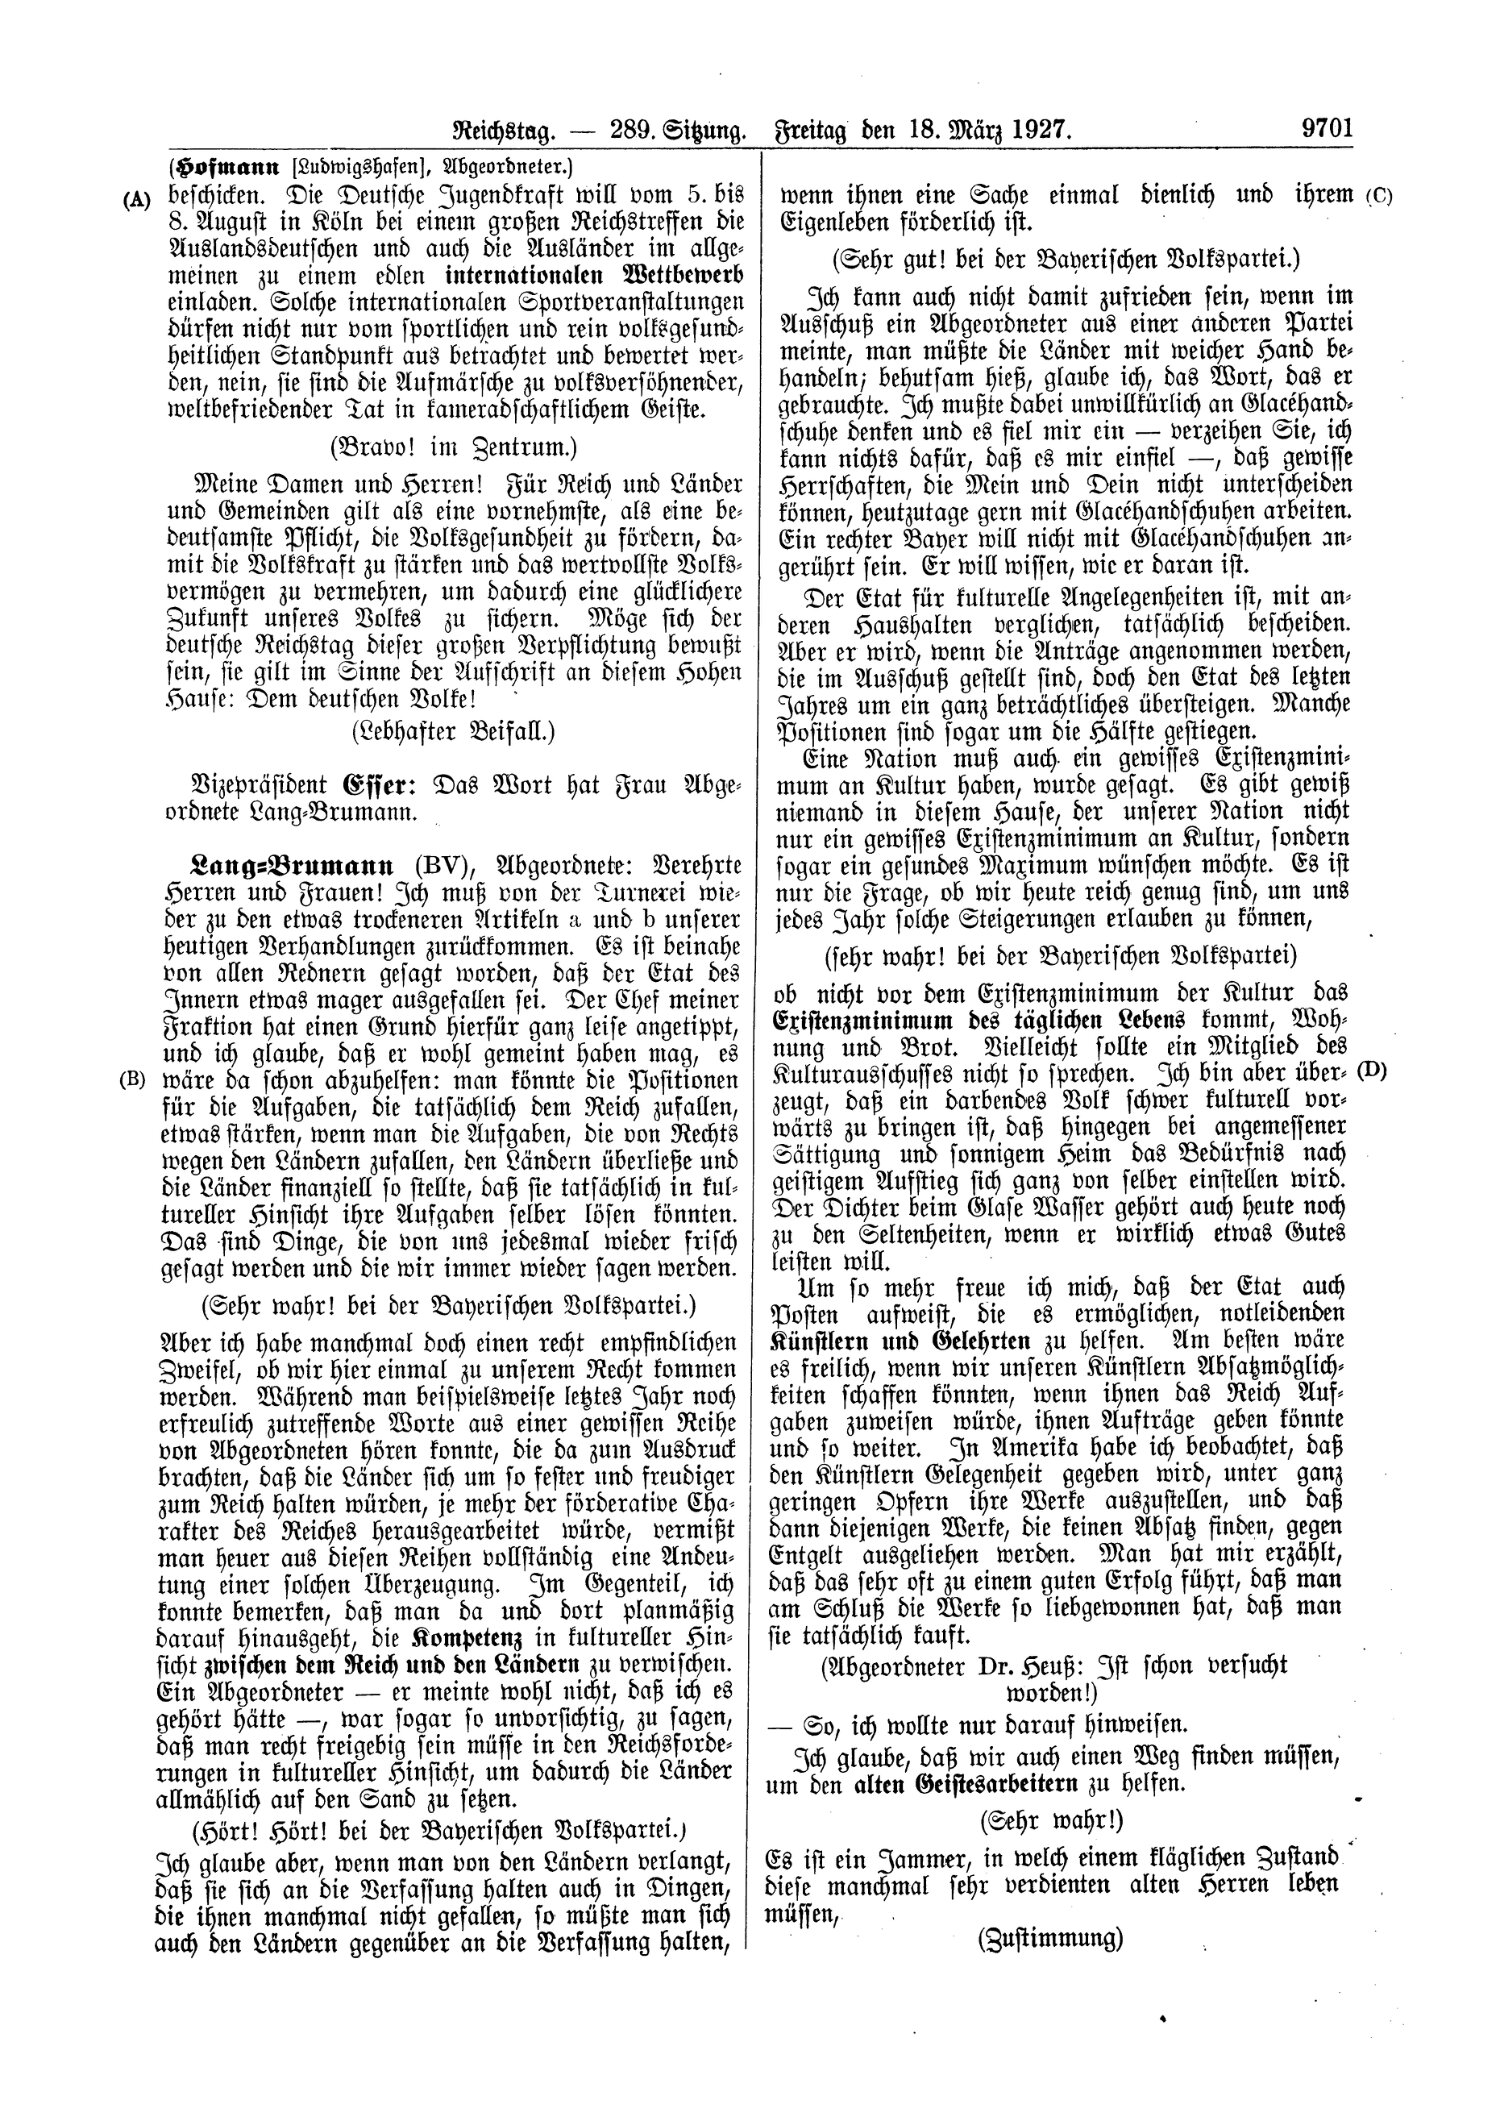 Scan of page 9701